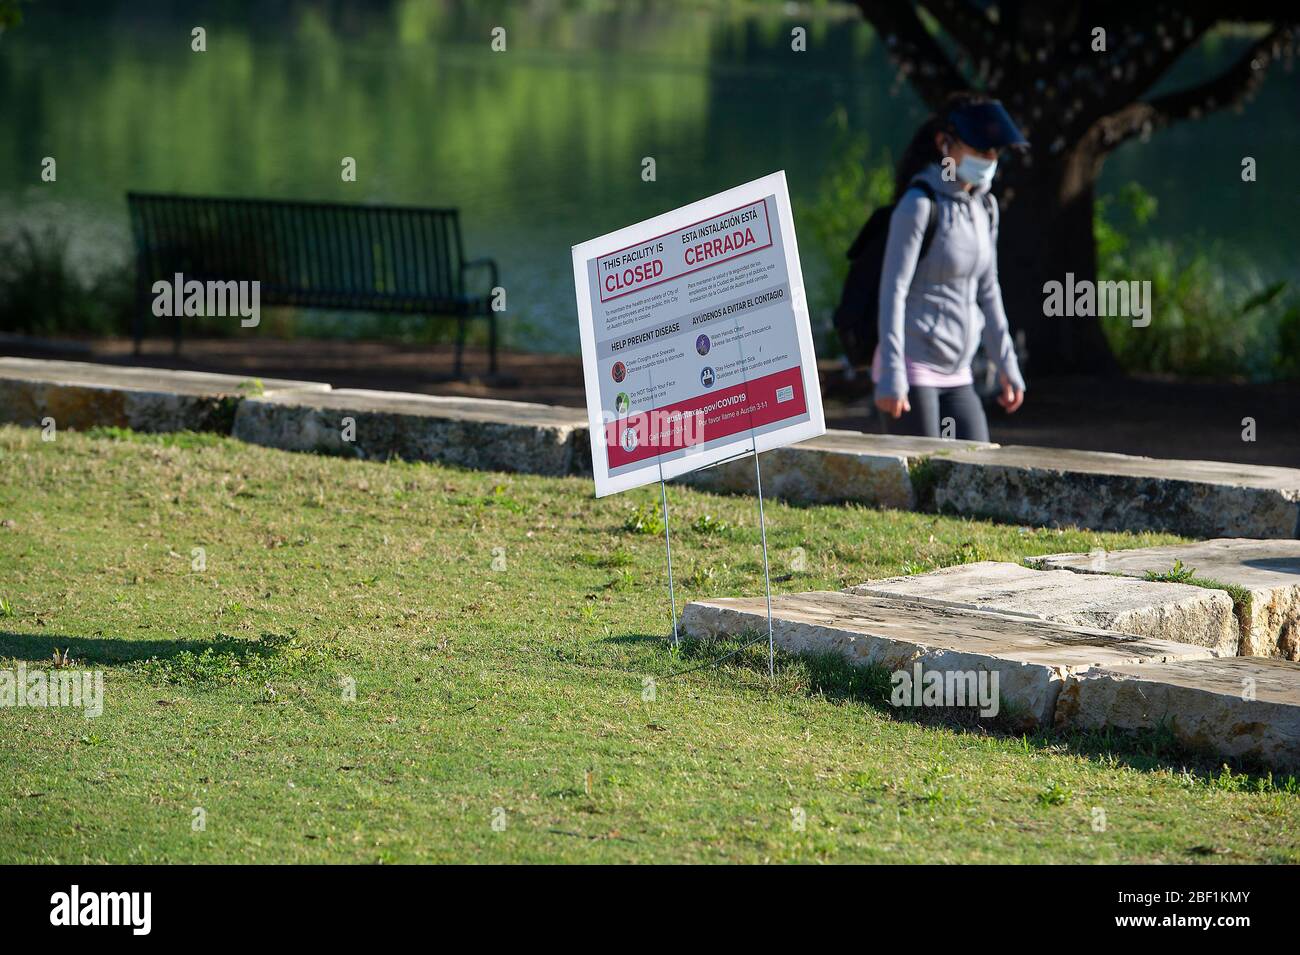 April 16, 2020: The City of Austin Parks Department issued signs that state 'This facility is CLOSED''. To maintain the health and safety of City of Austin employees and the public the City of Austin facility is closed. Austin, Texas. Mario Cantu/CSM Stock Photo